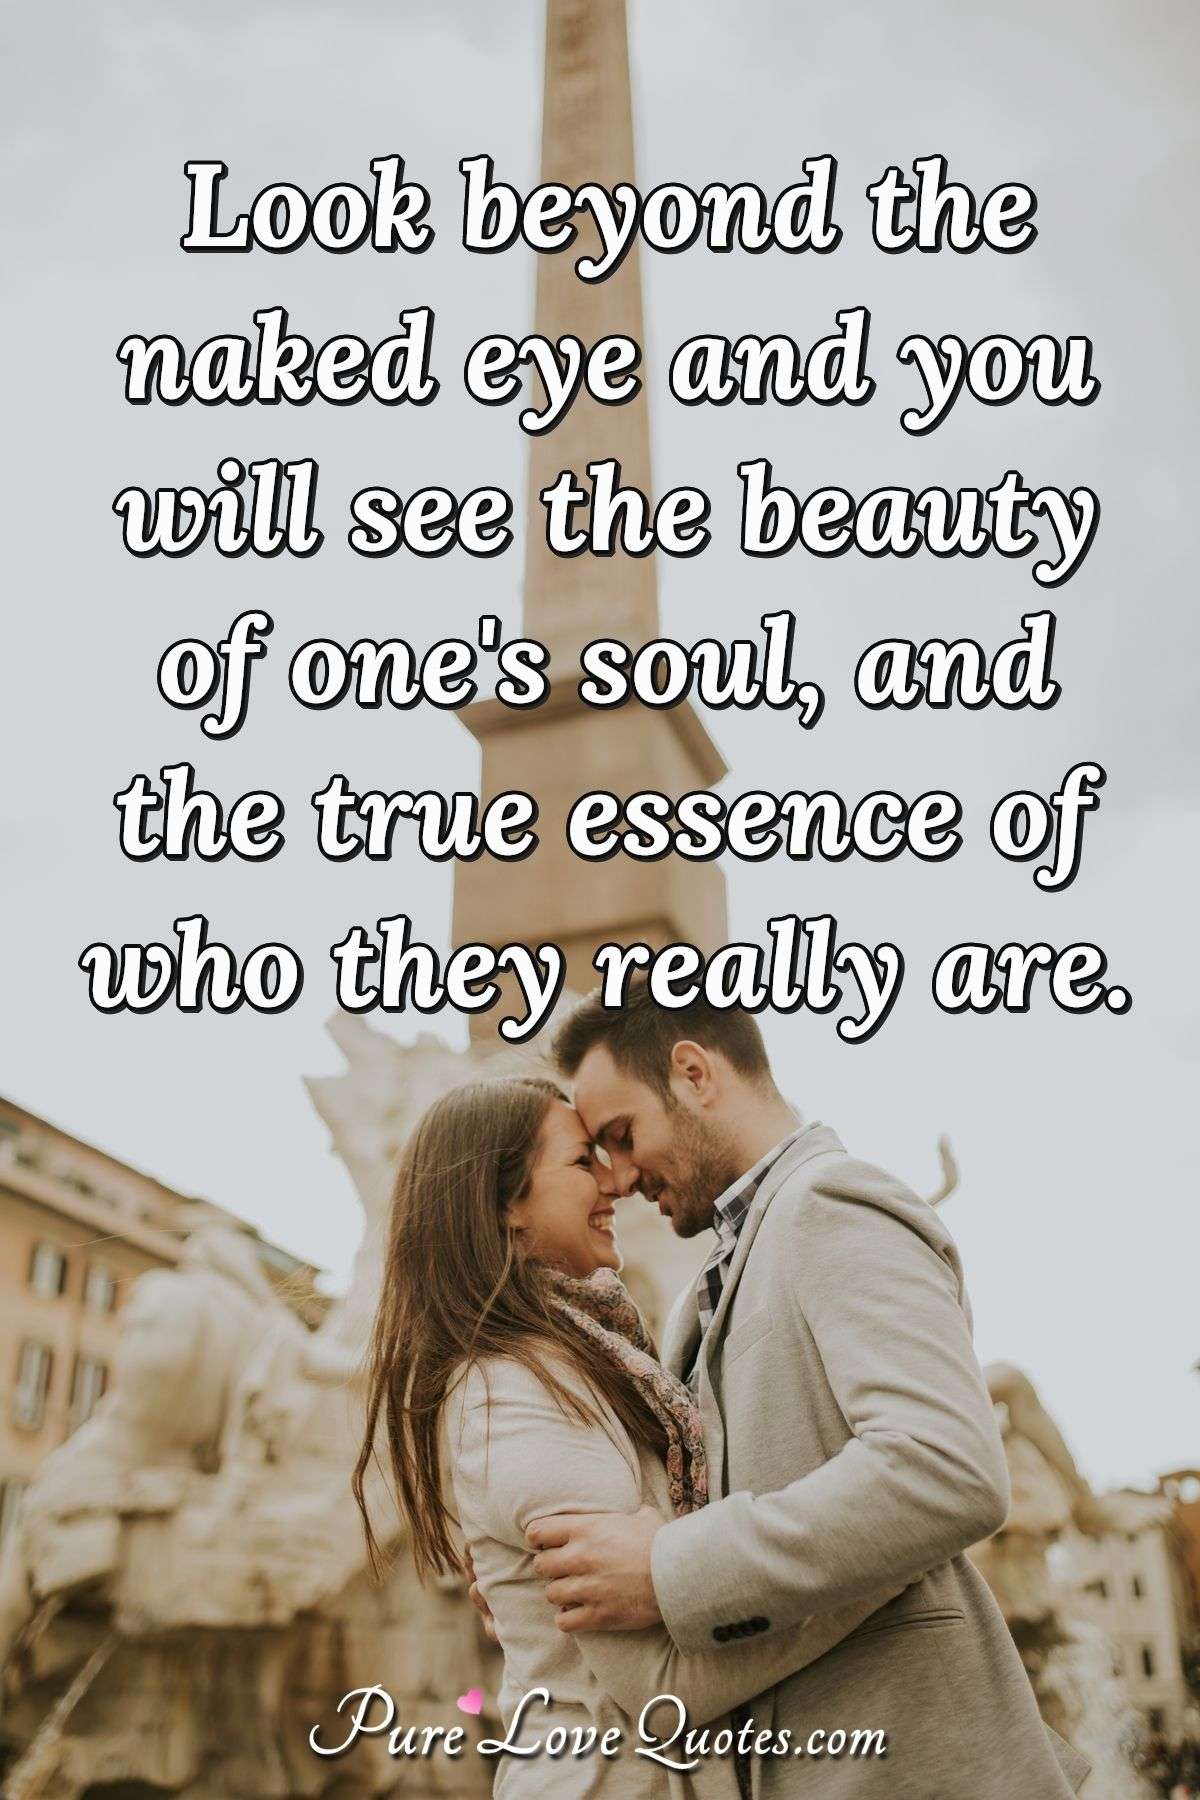 Look beyond the naked eye and you will see the beauty of one's soul, and the true essence of who they really are. - Anonymous